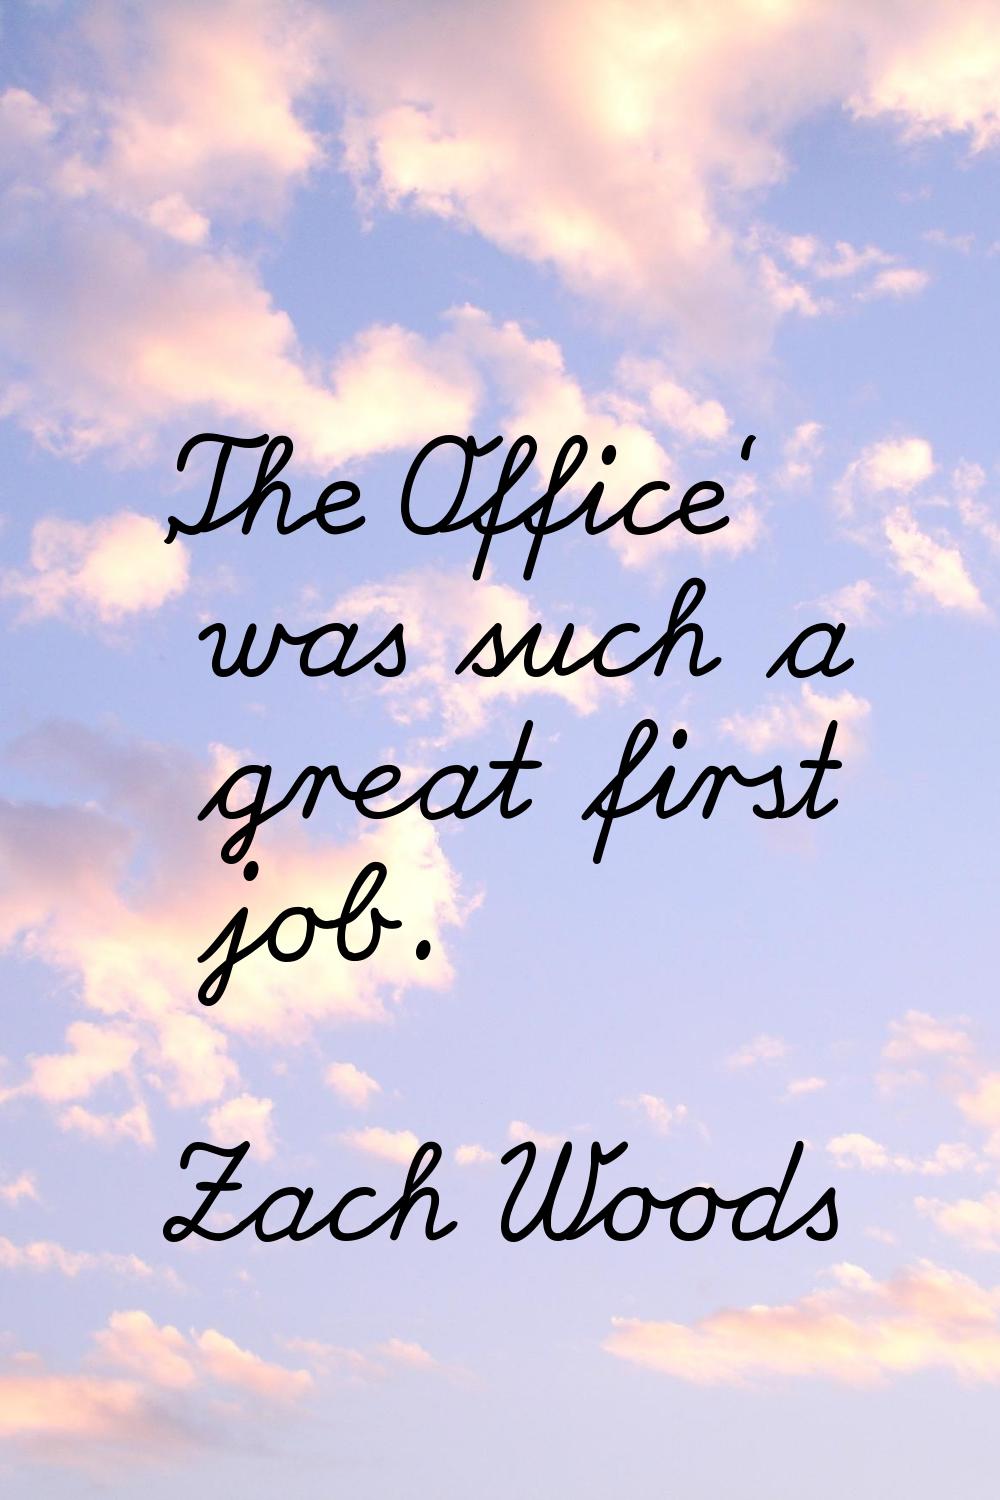 'The Office' was such a great first job.